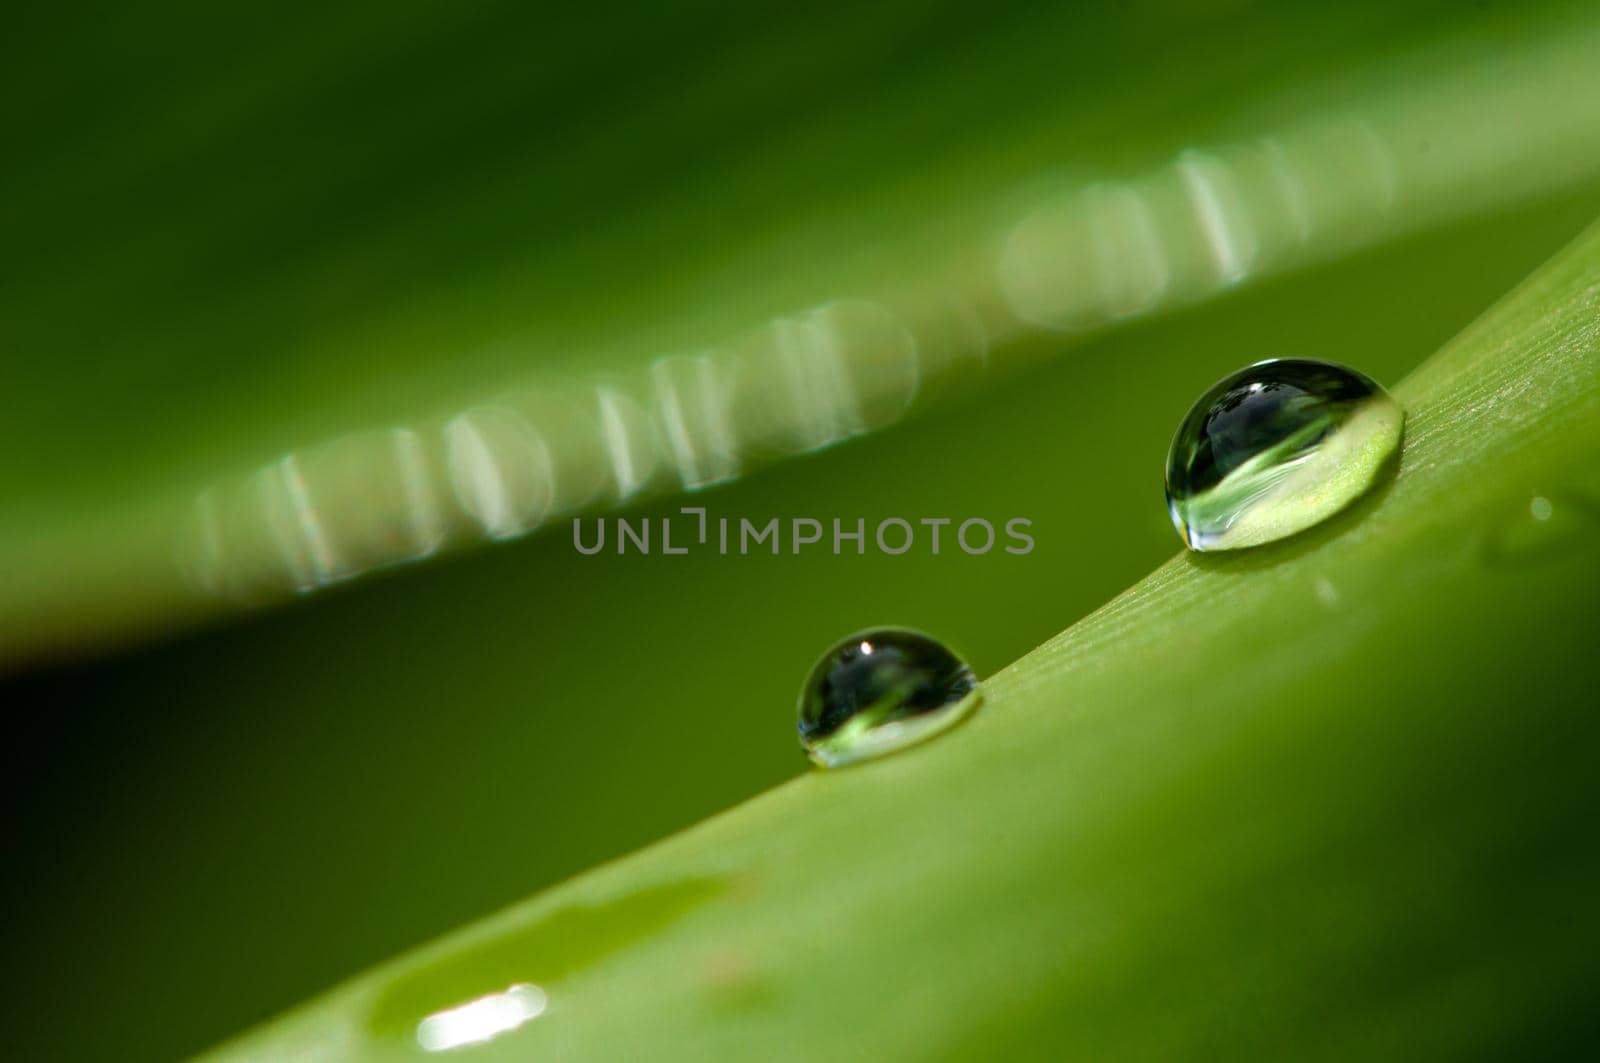 Water drops on green leaf.